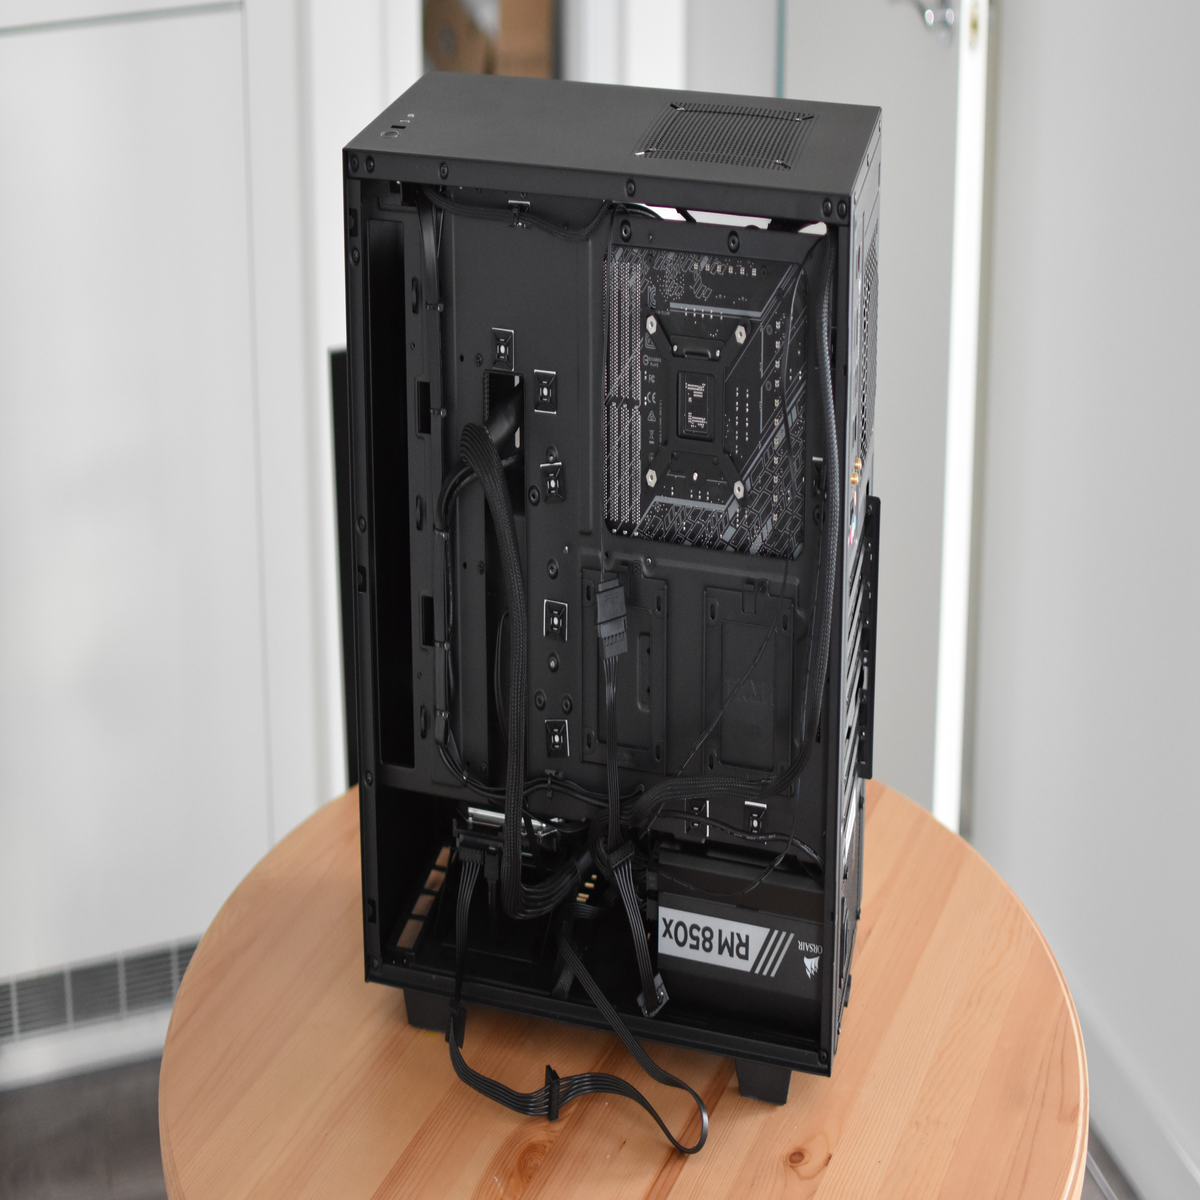 How-to manage the cables in your PC case - Edge Up